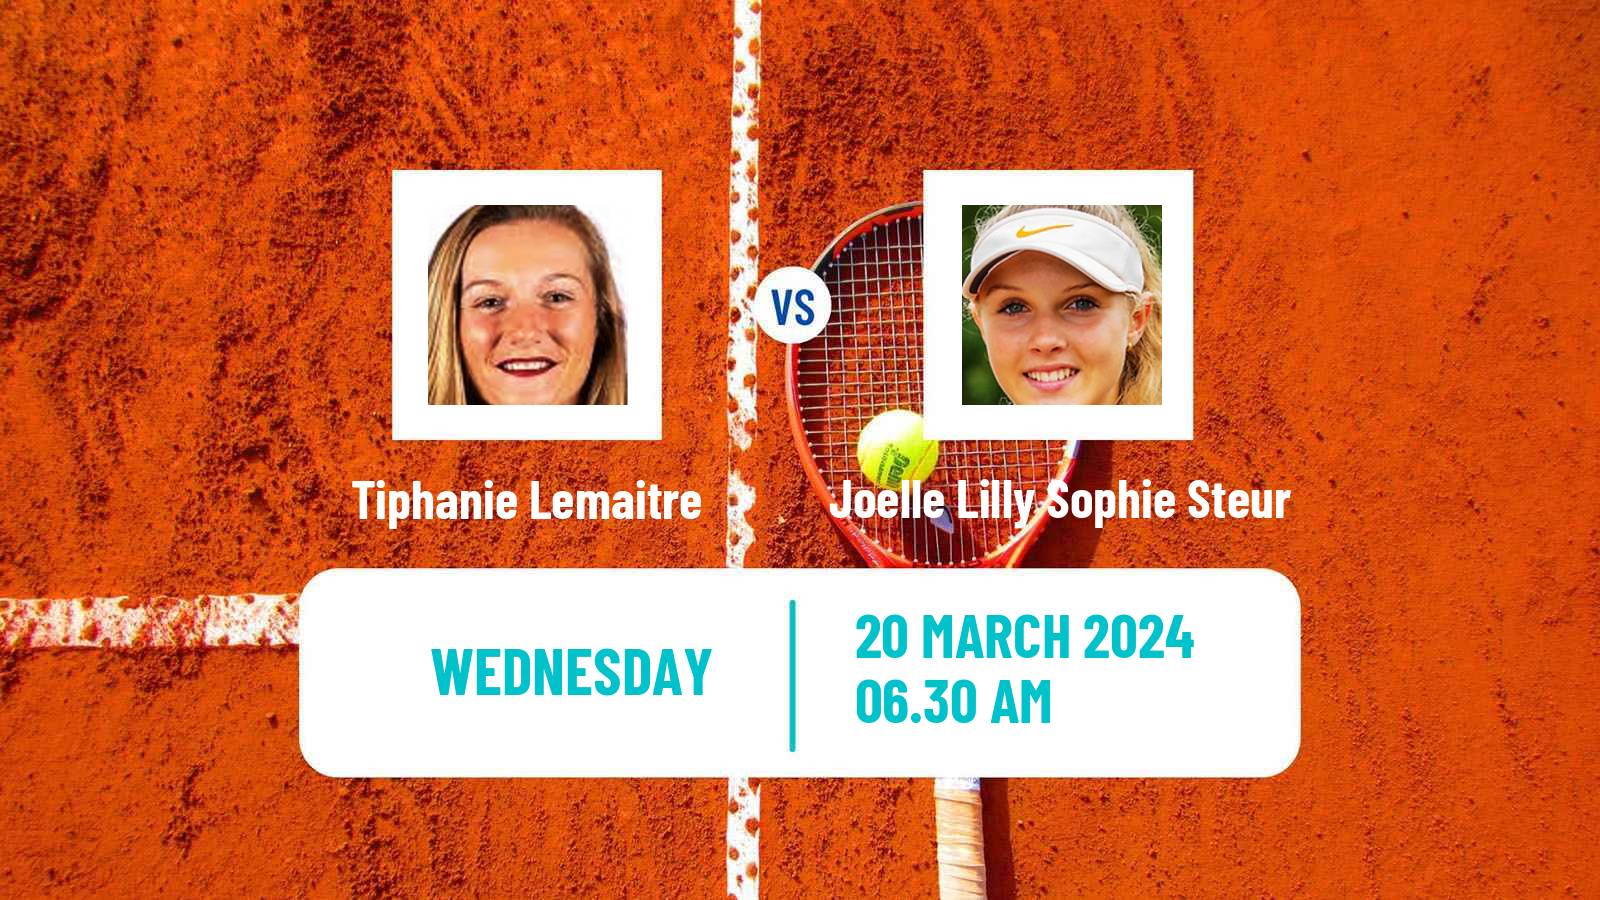 Tennis ITF W15 Sabadell Women Tiphanie Lemaitre - Joelle Lilly Sophie Steur